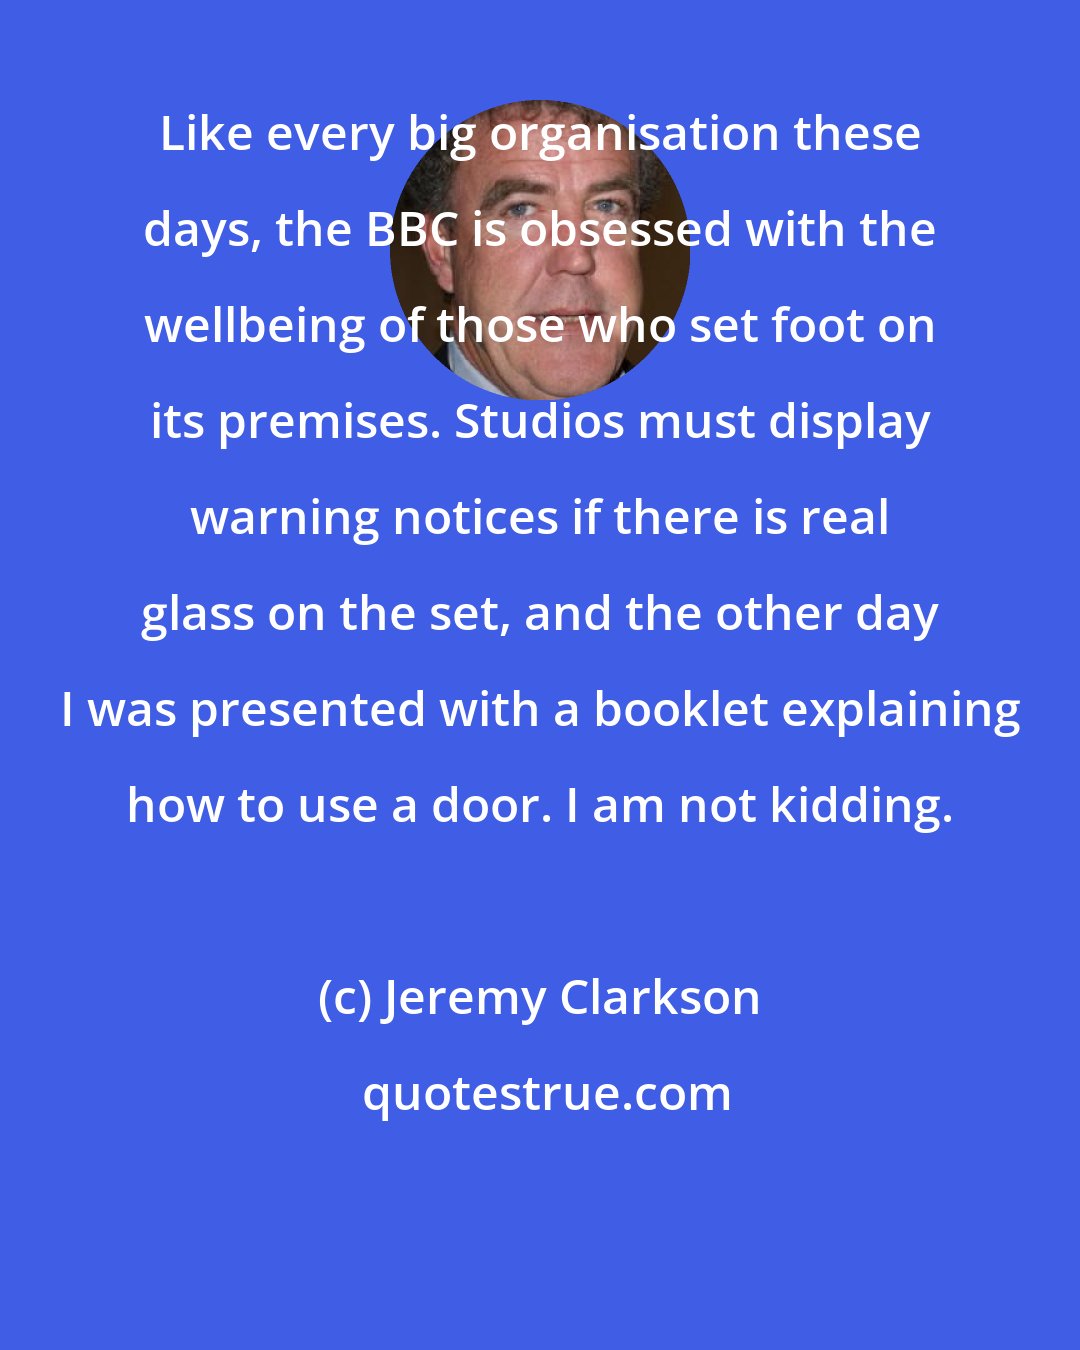 Jeremy Clarkson: Like every big organisation these days, the BBC is obsessed with the wellbeing of those who set foot on its premises. Studios must display warning notices if there is real glass on the set, and the other day I was presented with a booklet explaining how to use a door. I am not kidding.